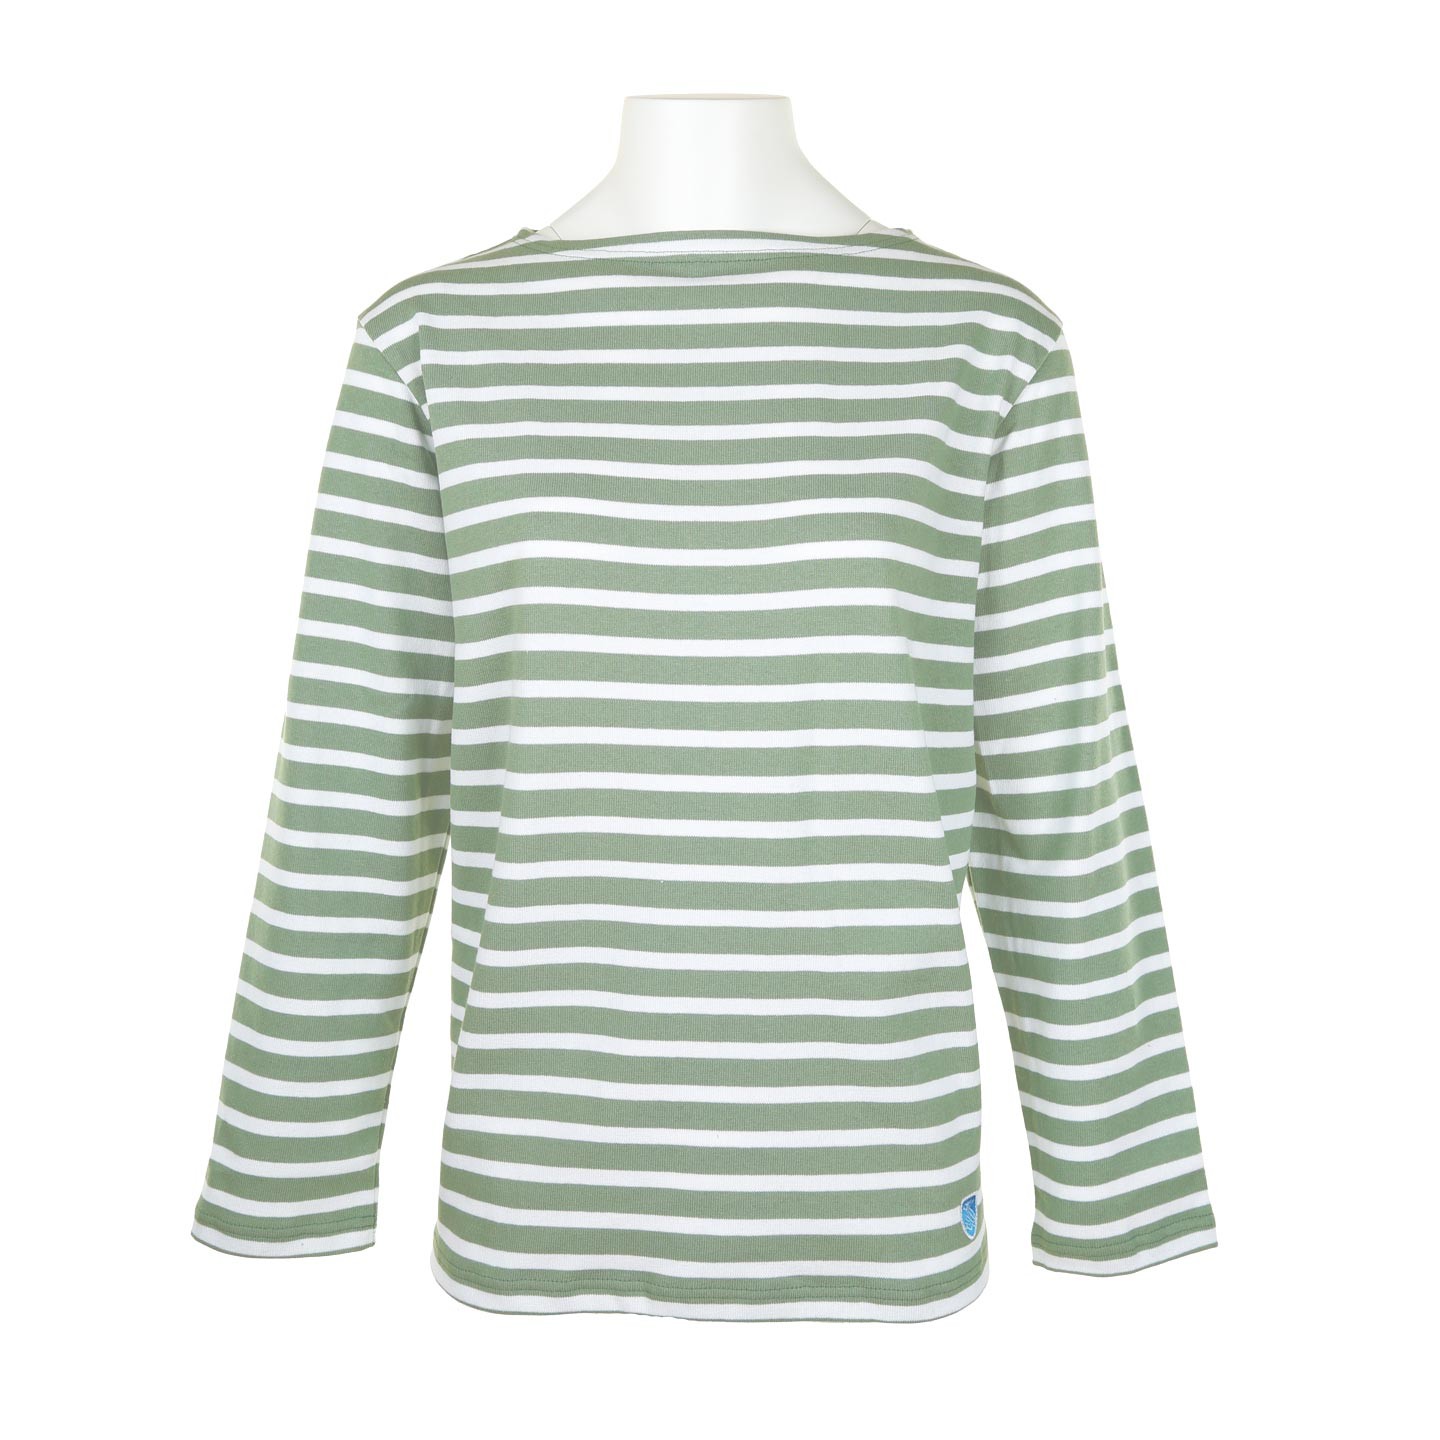 Striped shirt Spruce / White, unisex made in France Orcival